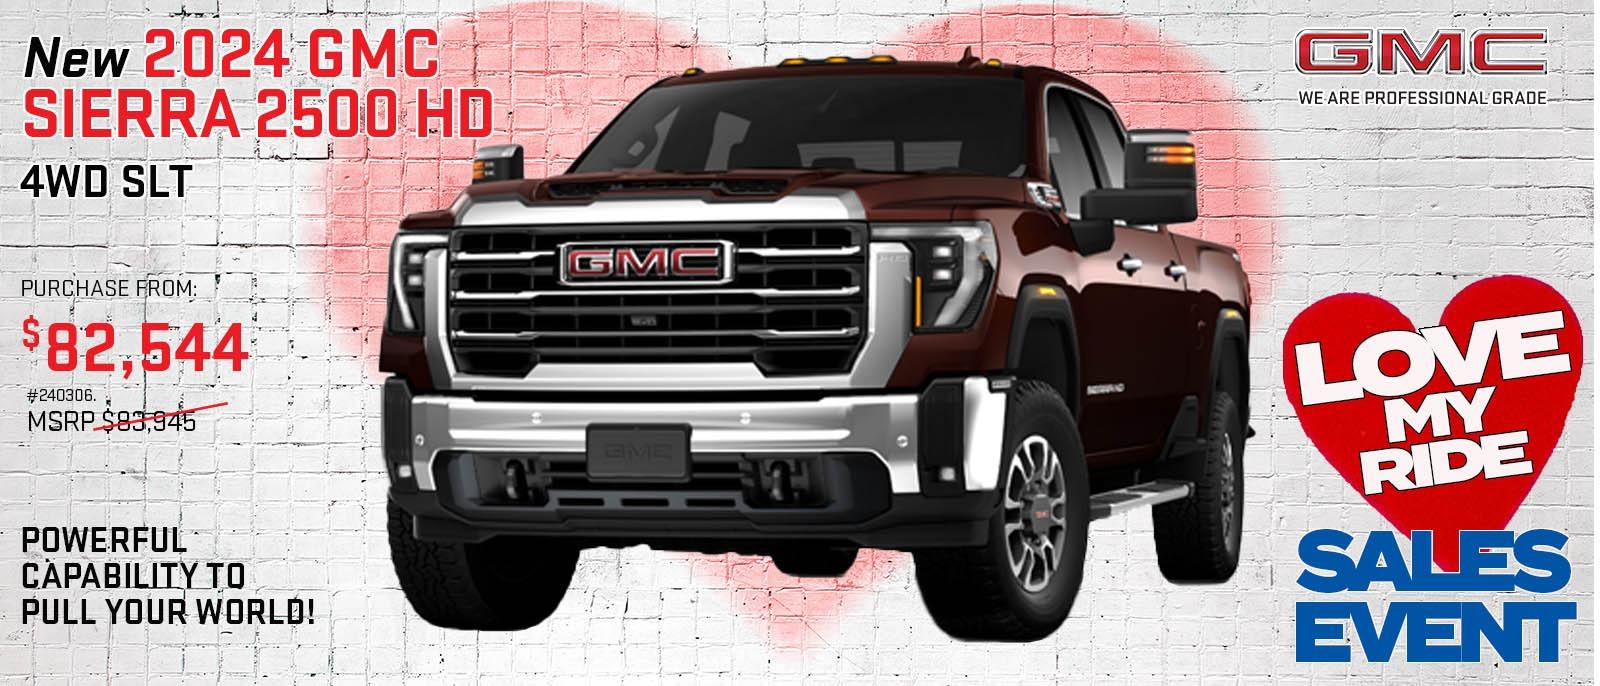 View the GMC Sierra HD Special in Denver at Shortline